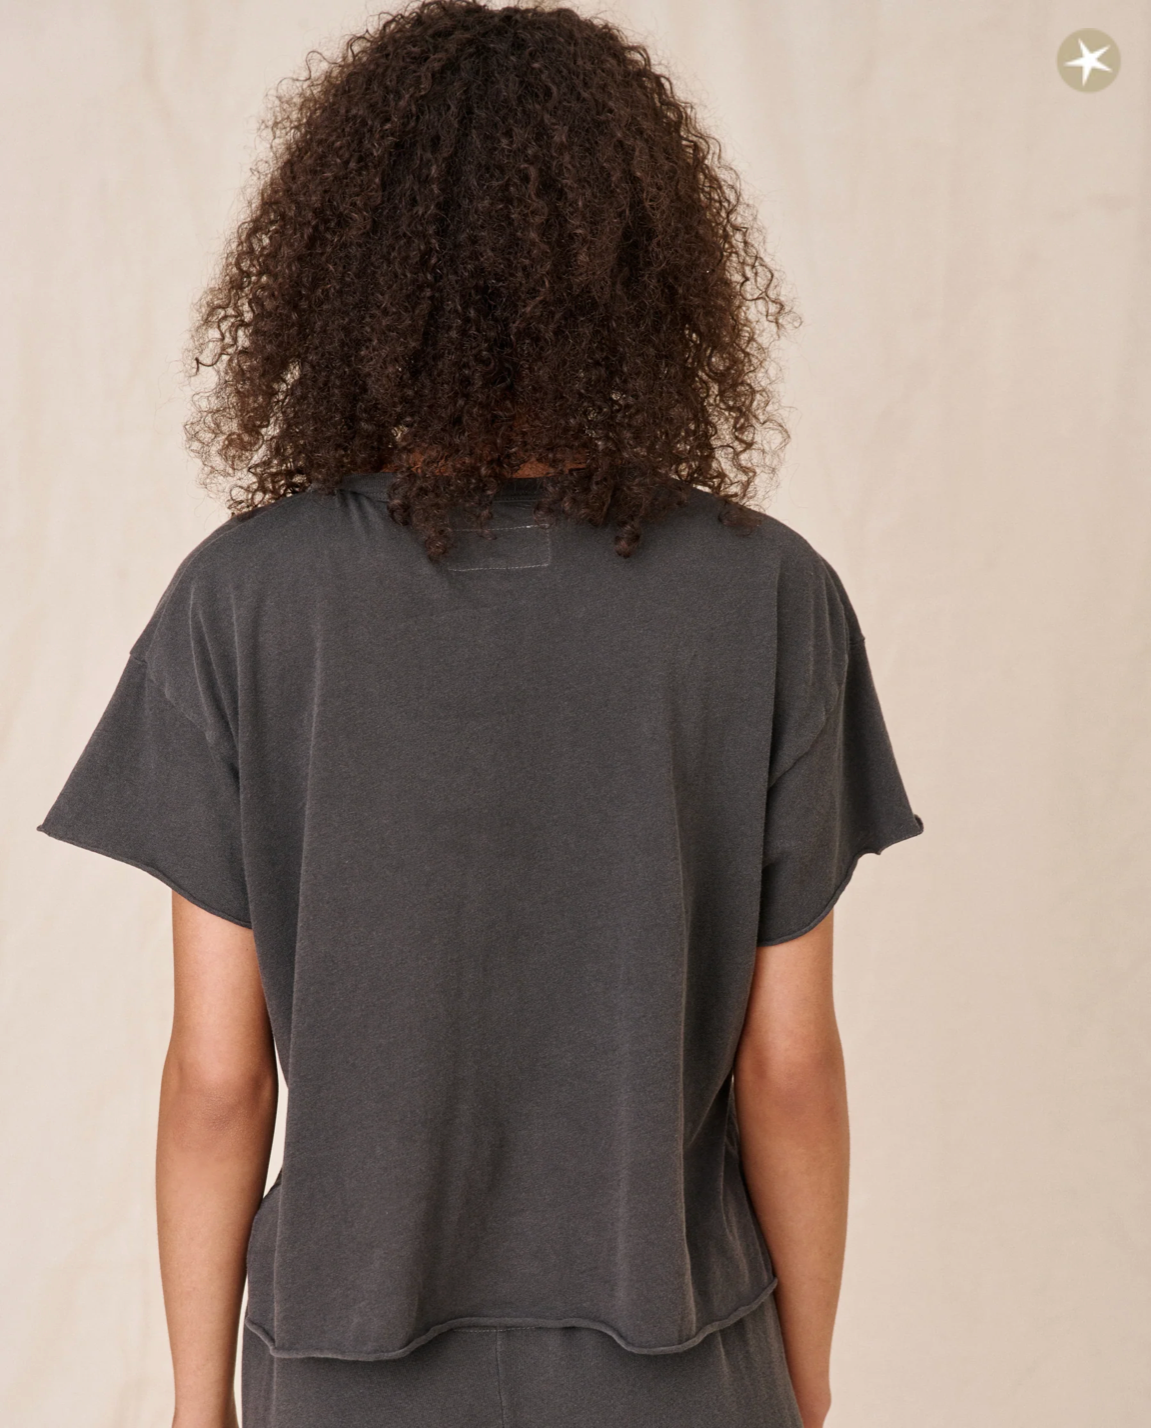 The Crop Tee. Washed Black